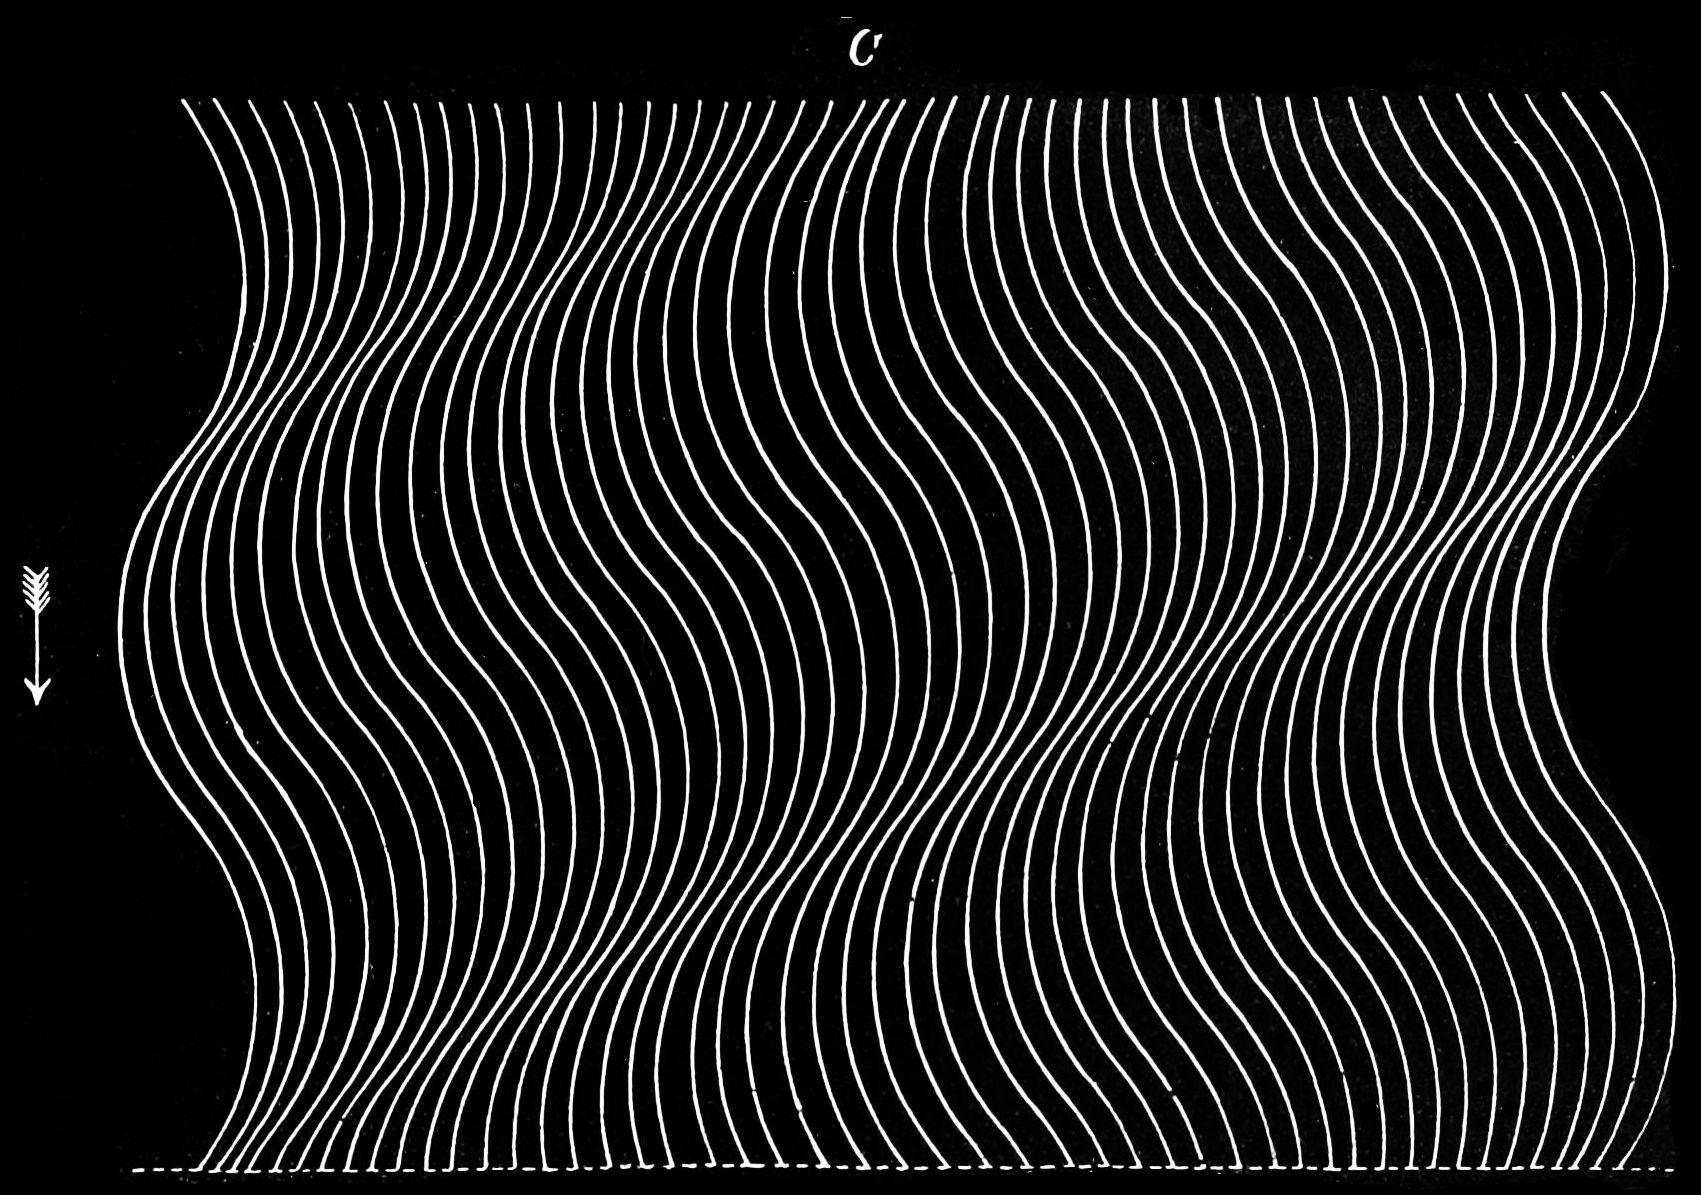 Image of compressed and rarefied air particles of sound waves